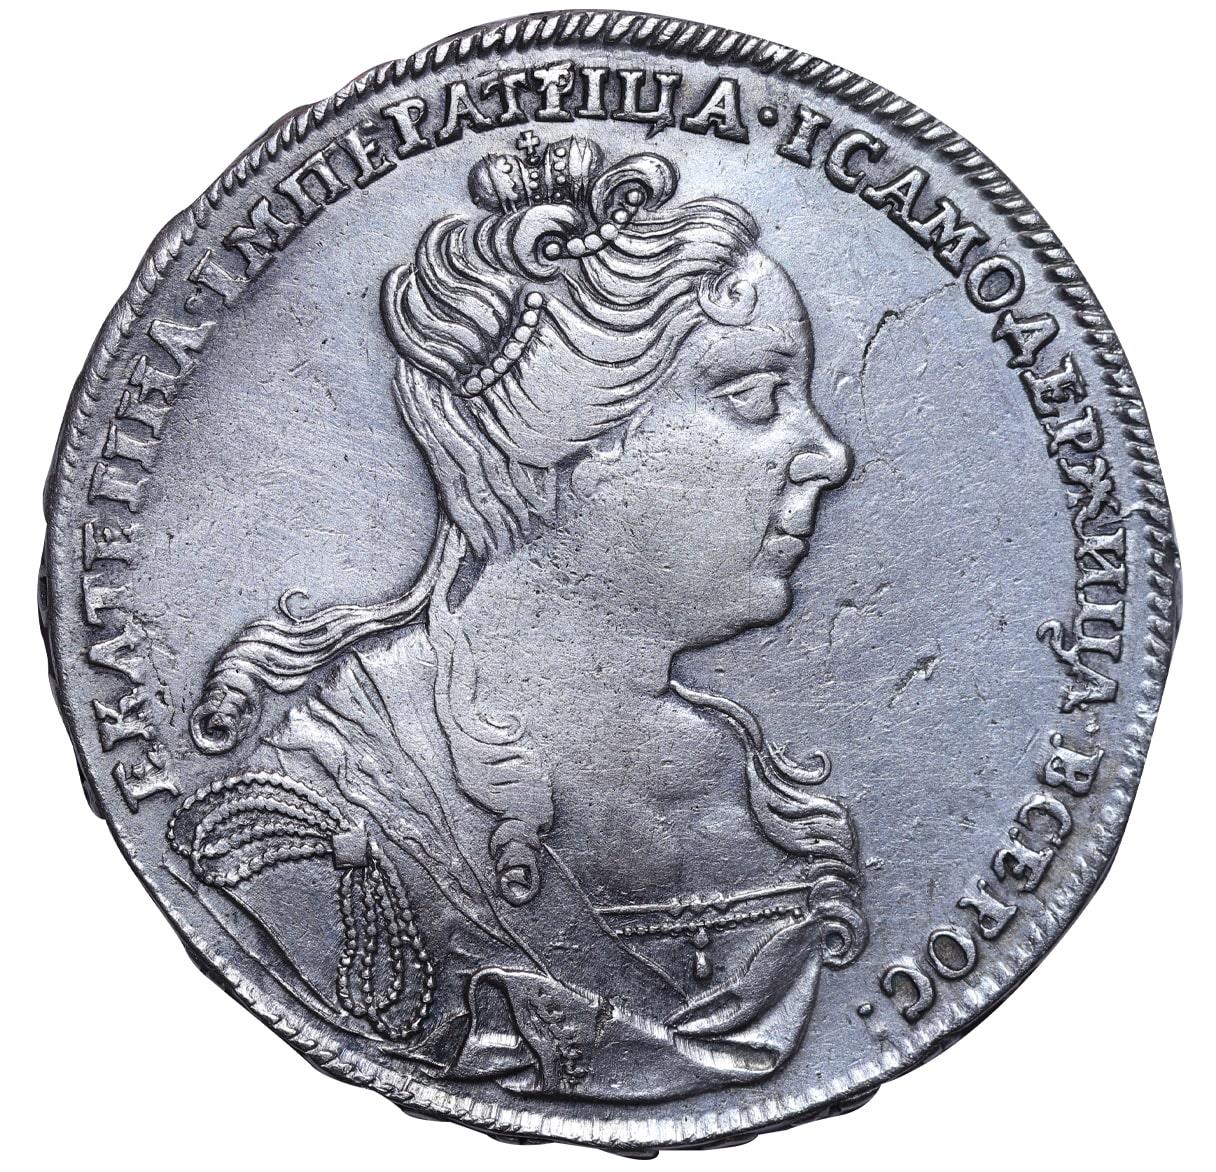 Russian Empire, 1 Rouble, 1726 year - Image 2 of 3